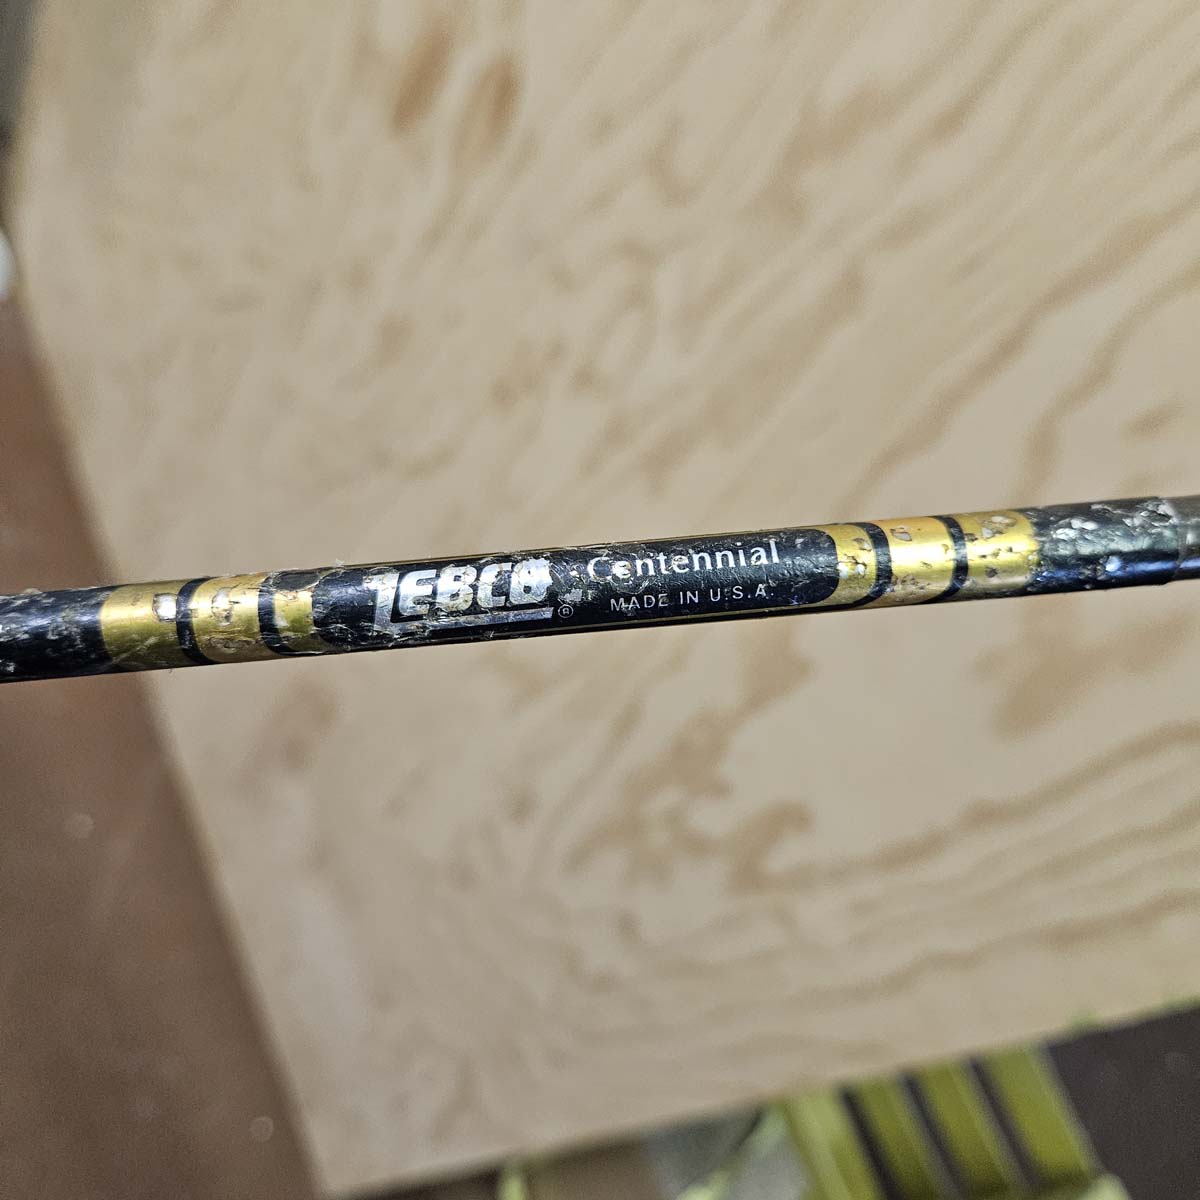 Zebco Centennial Fishing Pole with Closed Reel - 71